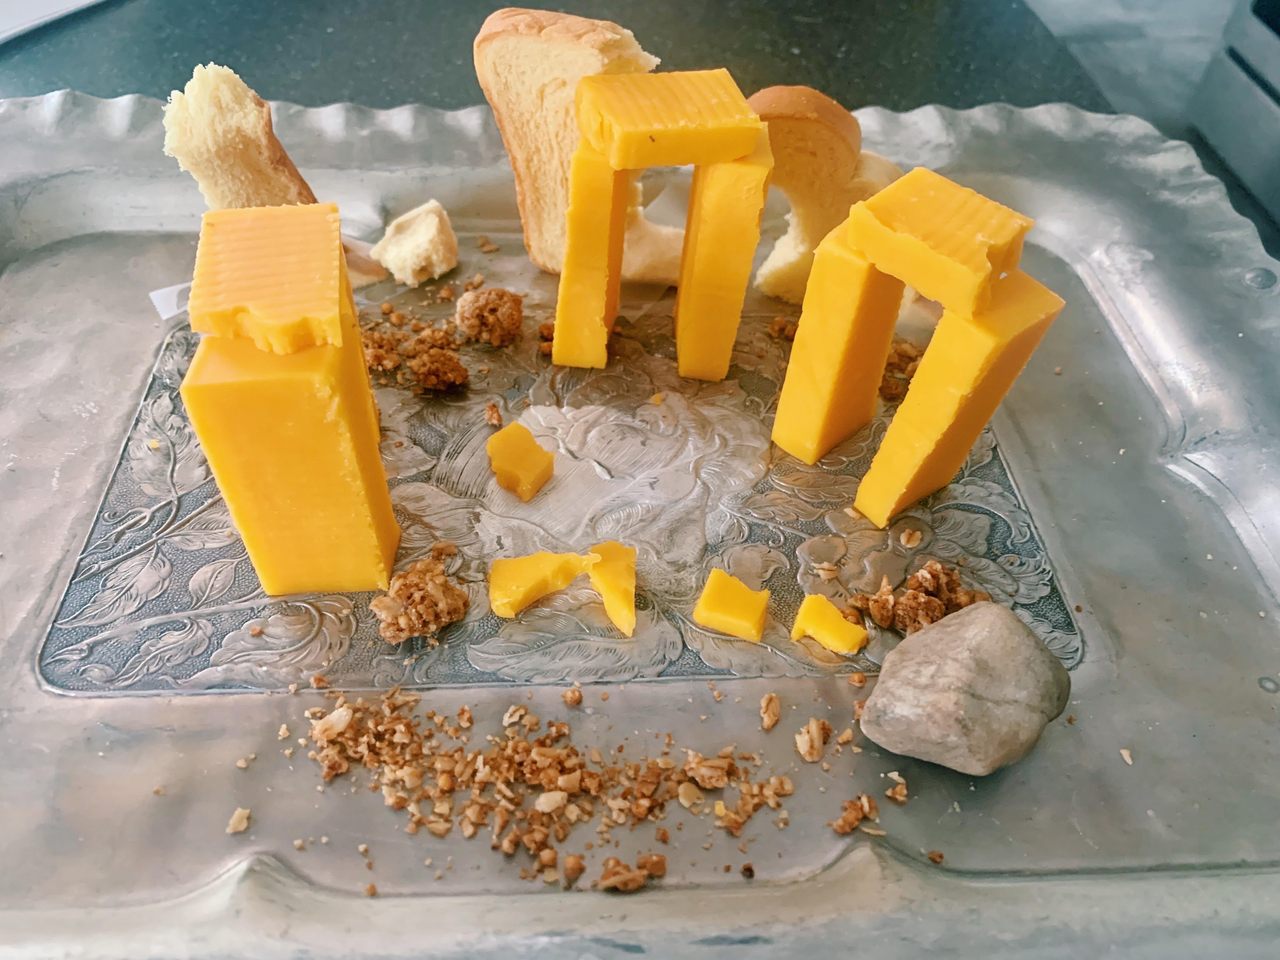 This cheese, granola, and bread creation was made by Alexandra McNamara in Tappan, New York. 